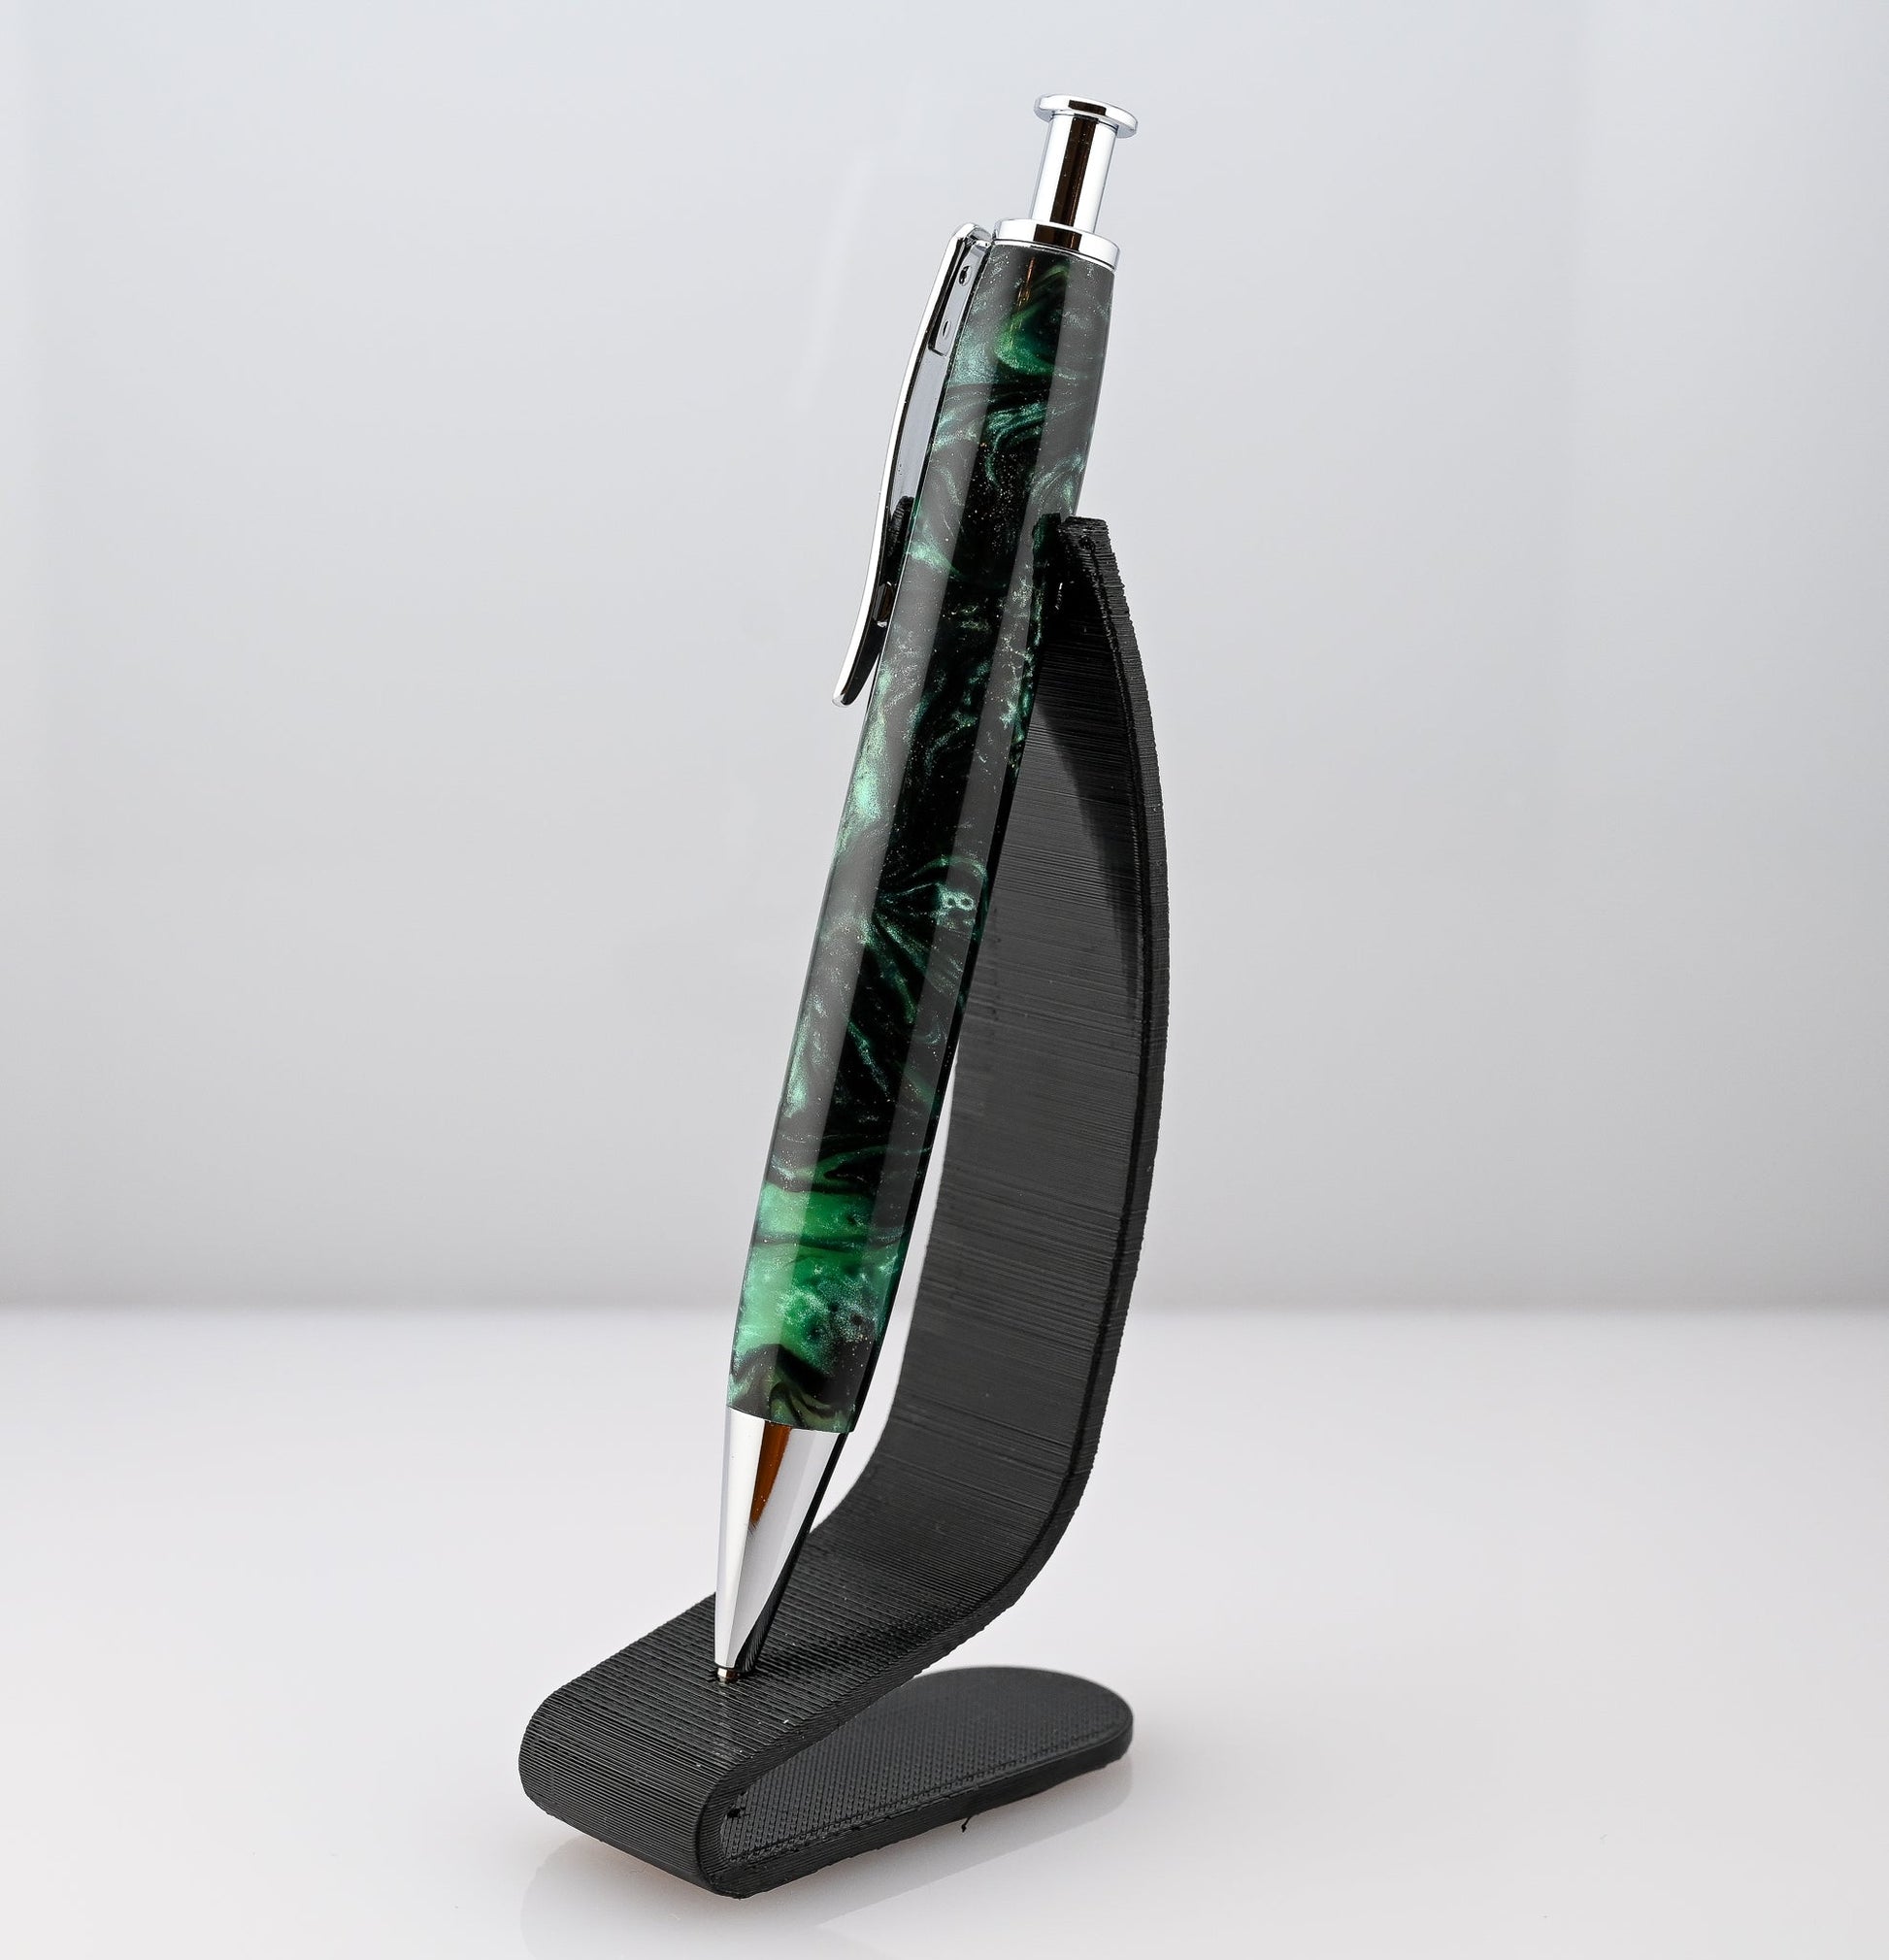 Handmade green and black swirl long smooth click pen with chrome plating